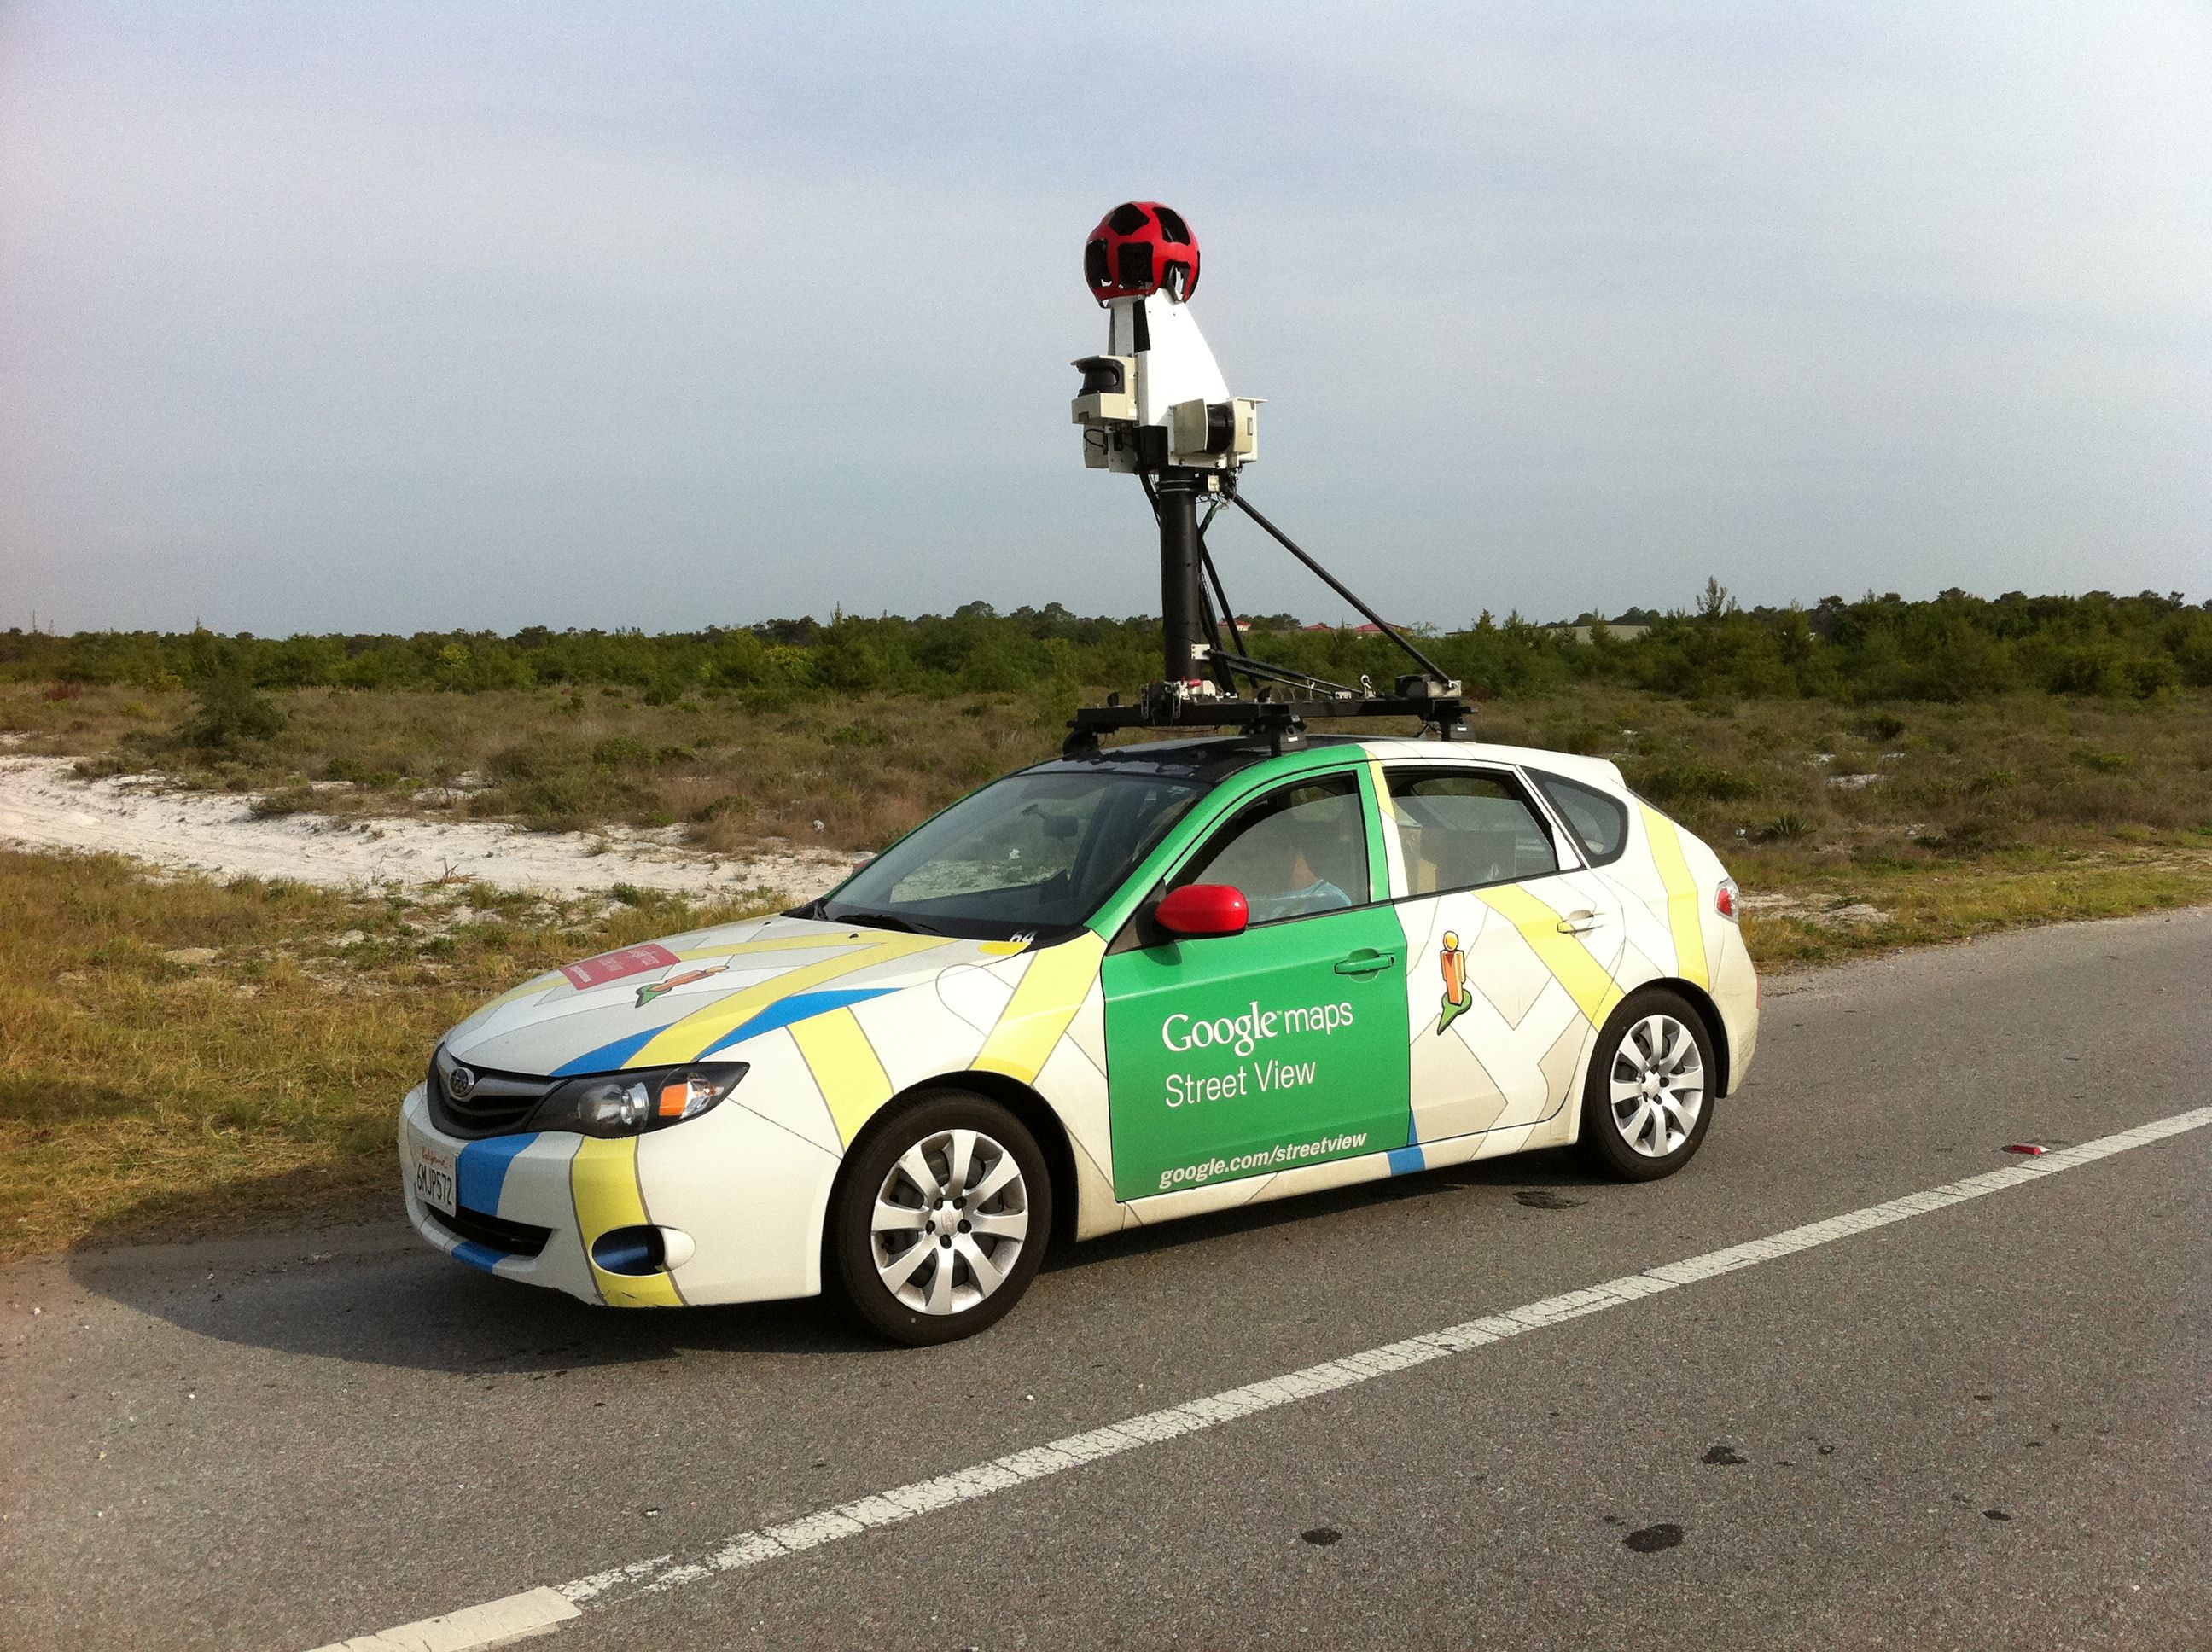 A Google Street View vehicle on the side of the road in a rural area